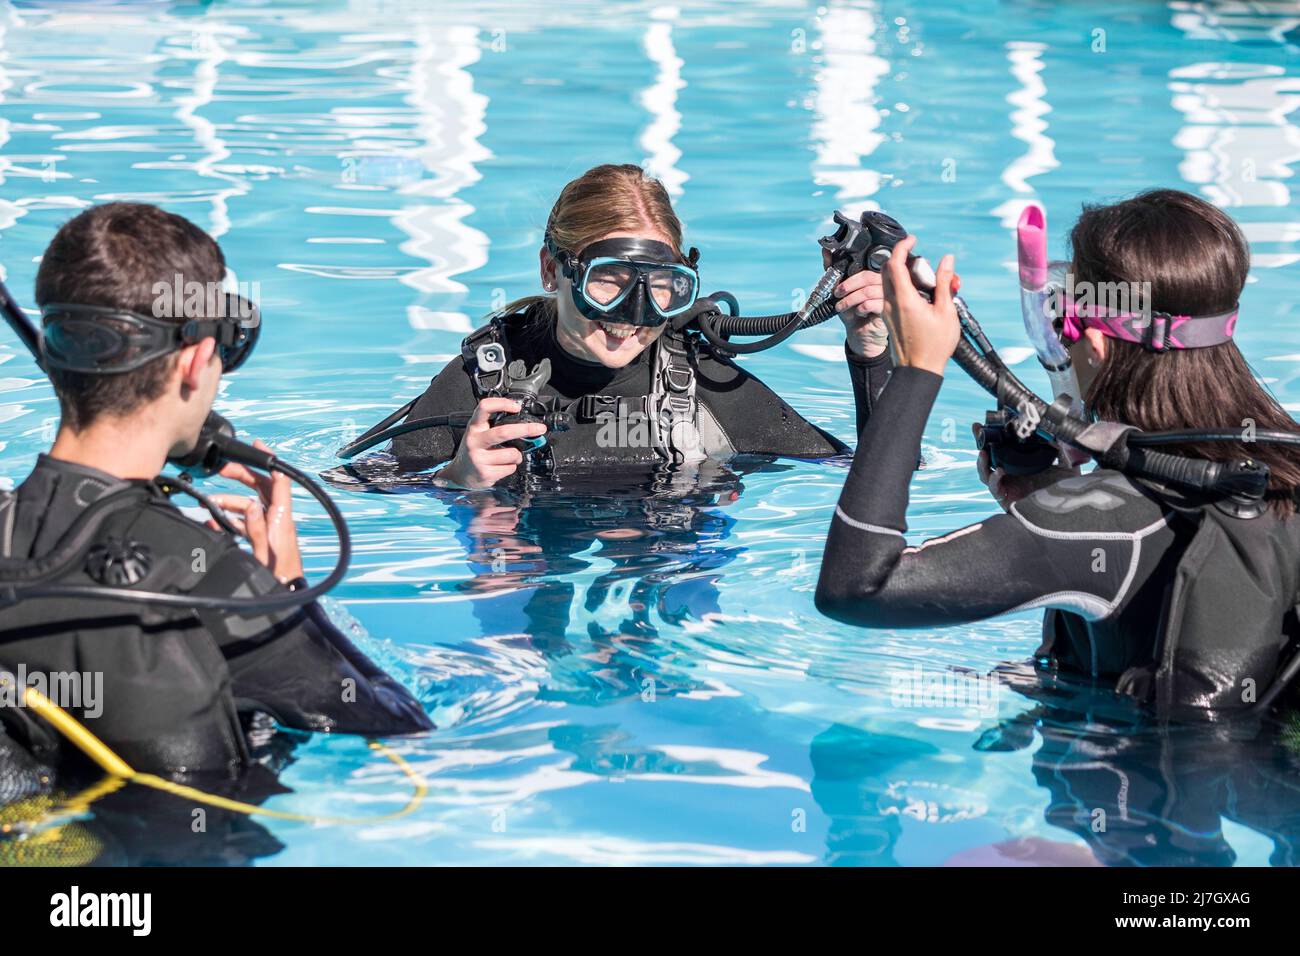 Scuba dive training in the pool with a smiling instructor teaching two students Stock Photo